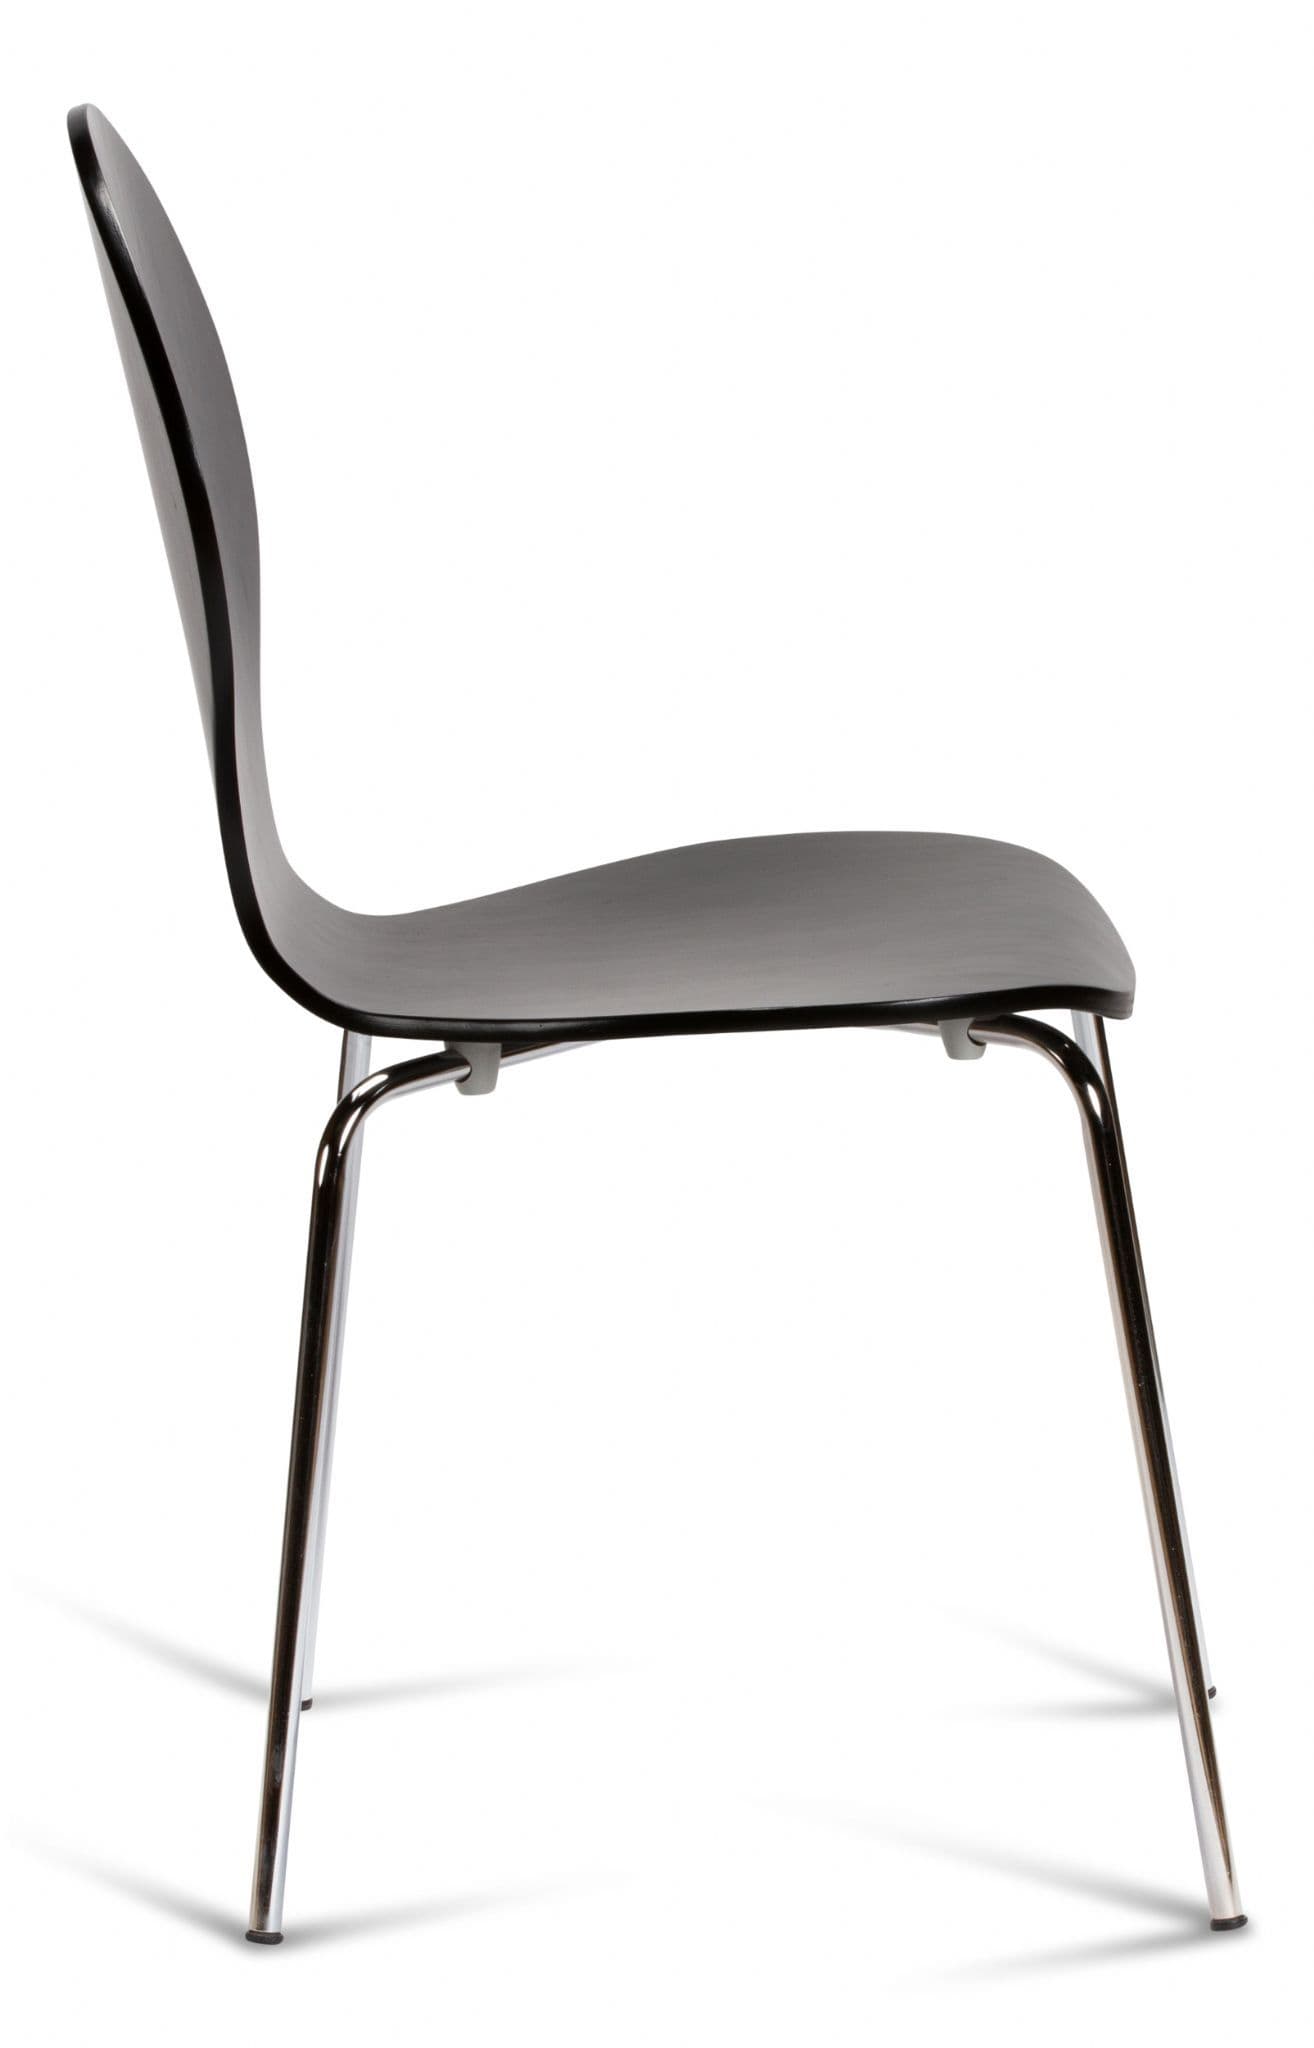 Kimberley Black & Chrome Dining Chairs Side View